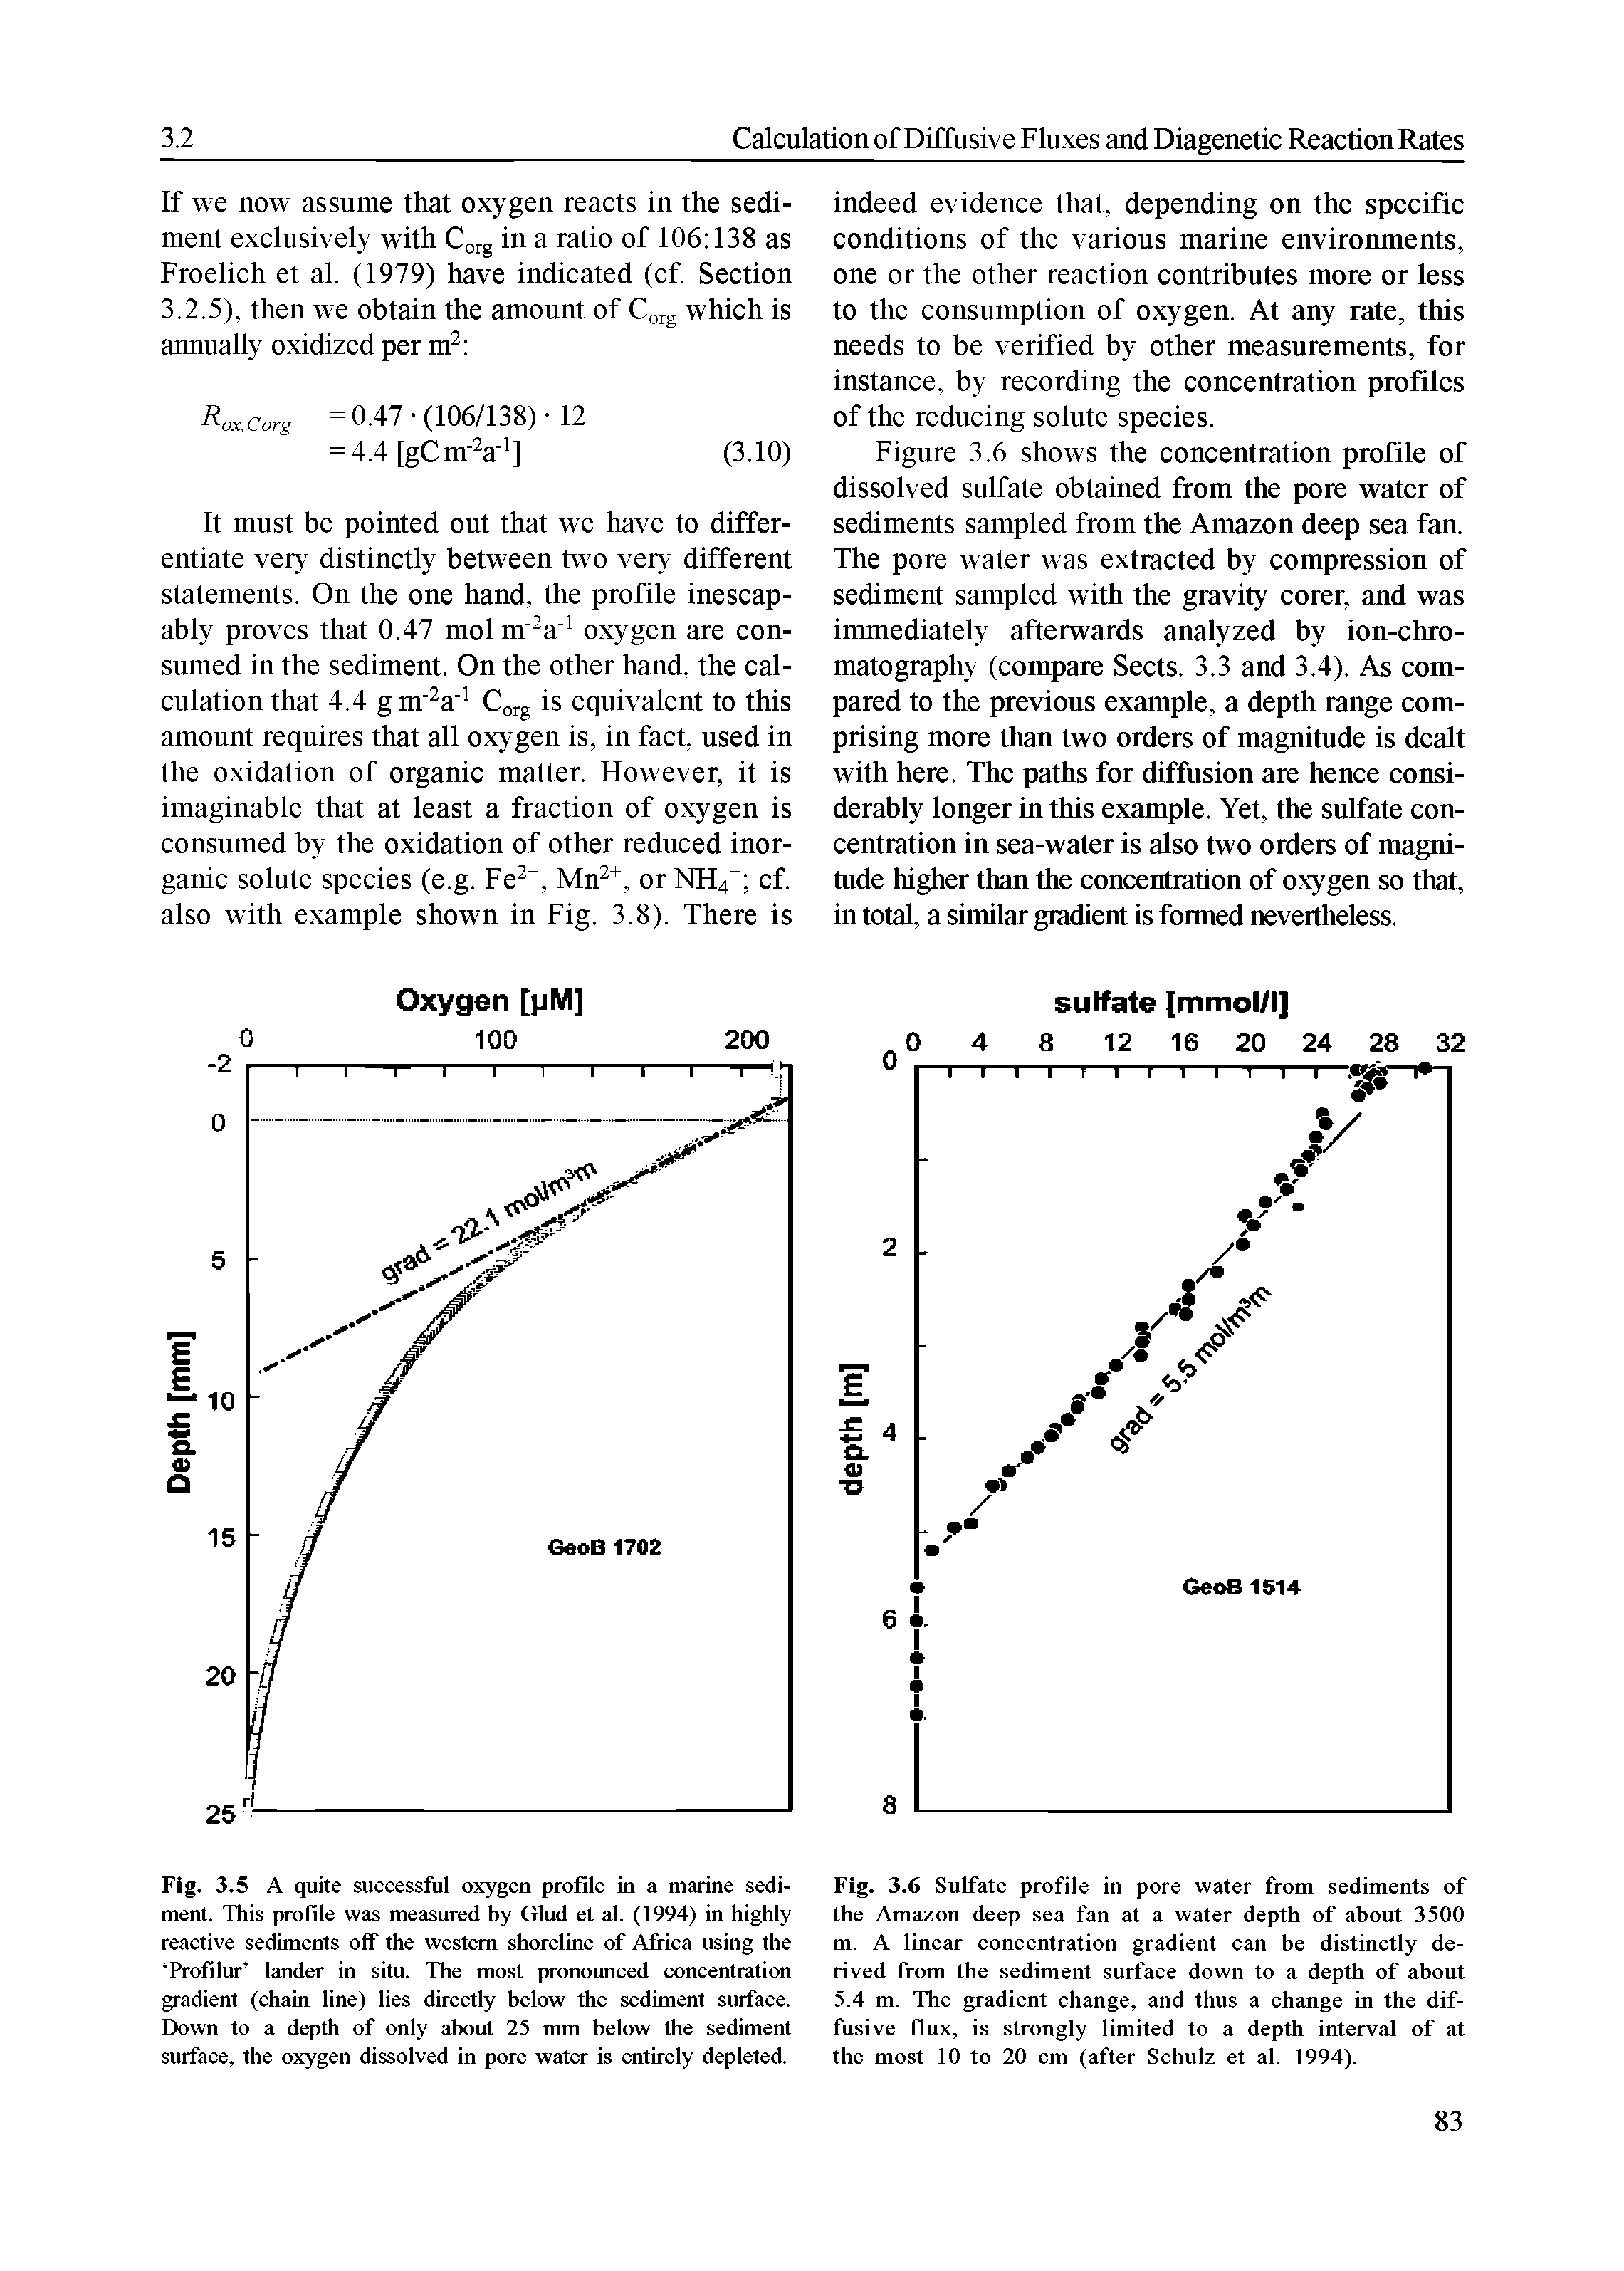 Fig. 3.5 A quite successful oxygen profile in a marine sediment. This profile was measured by Glud et al. (1994) in highly reactive sediments off the western shoreline of Africa using the Profilur lander in situ. The most pronounced concentration gradient (chain line) lies directly below the sediment surface. Down to a depth of only about 25 mm below the sediment surface, the oxygen dissolved in pore water is entirely depleted.